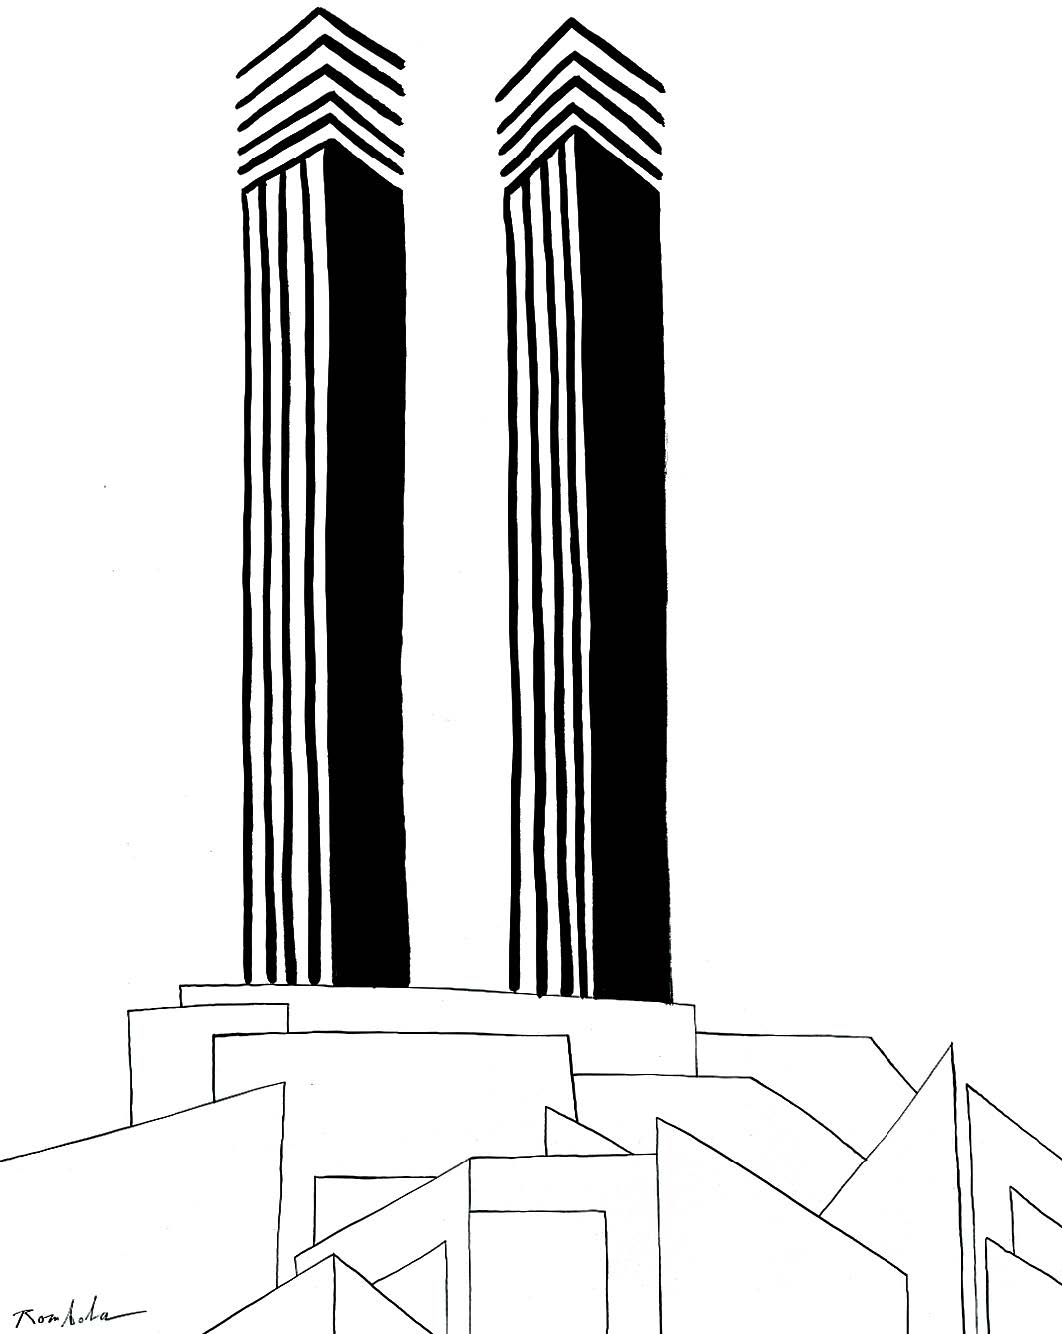   Twin Towers   circa 1973 / 74 Ink on paper  